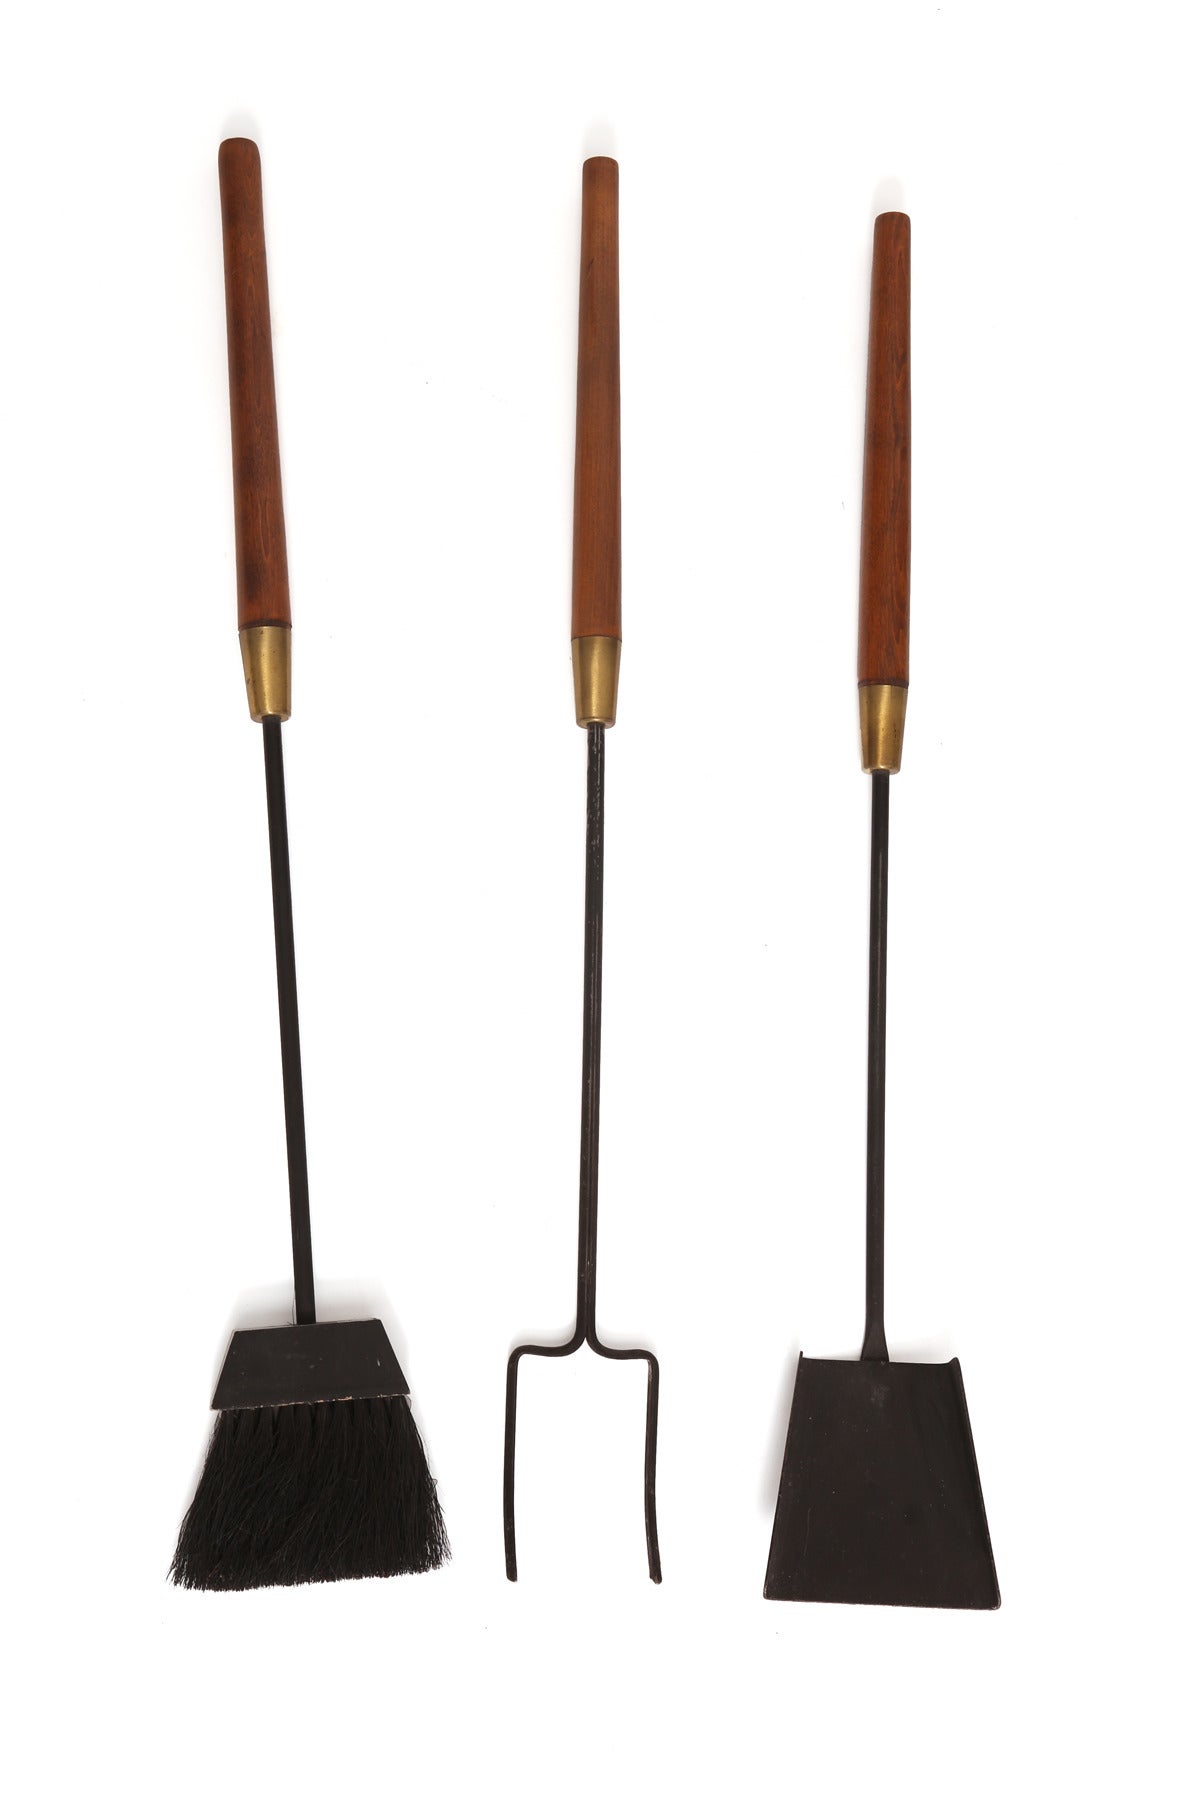 Walnut iron and brass fireplace tools, circa late 1950s. These all original examples have solid walnut handles with brass accents and iron stems and holder.  Till the end of 2015, Red Modern Furniture is offering free shipping within the United